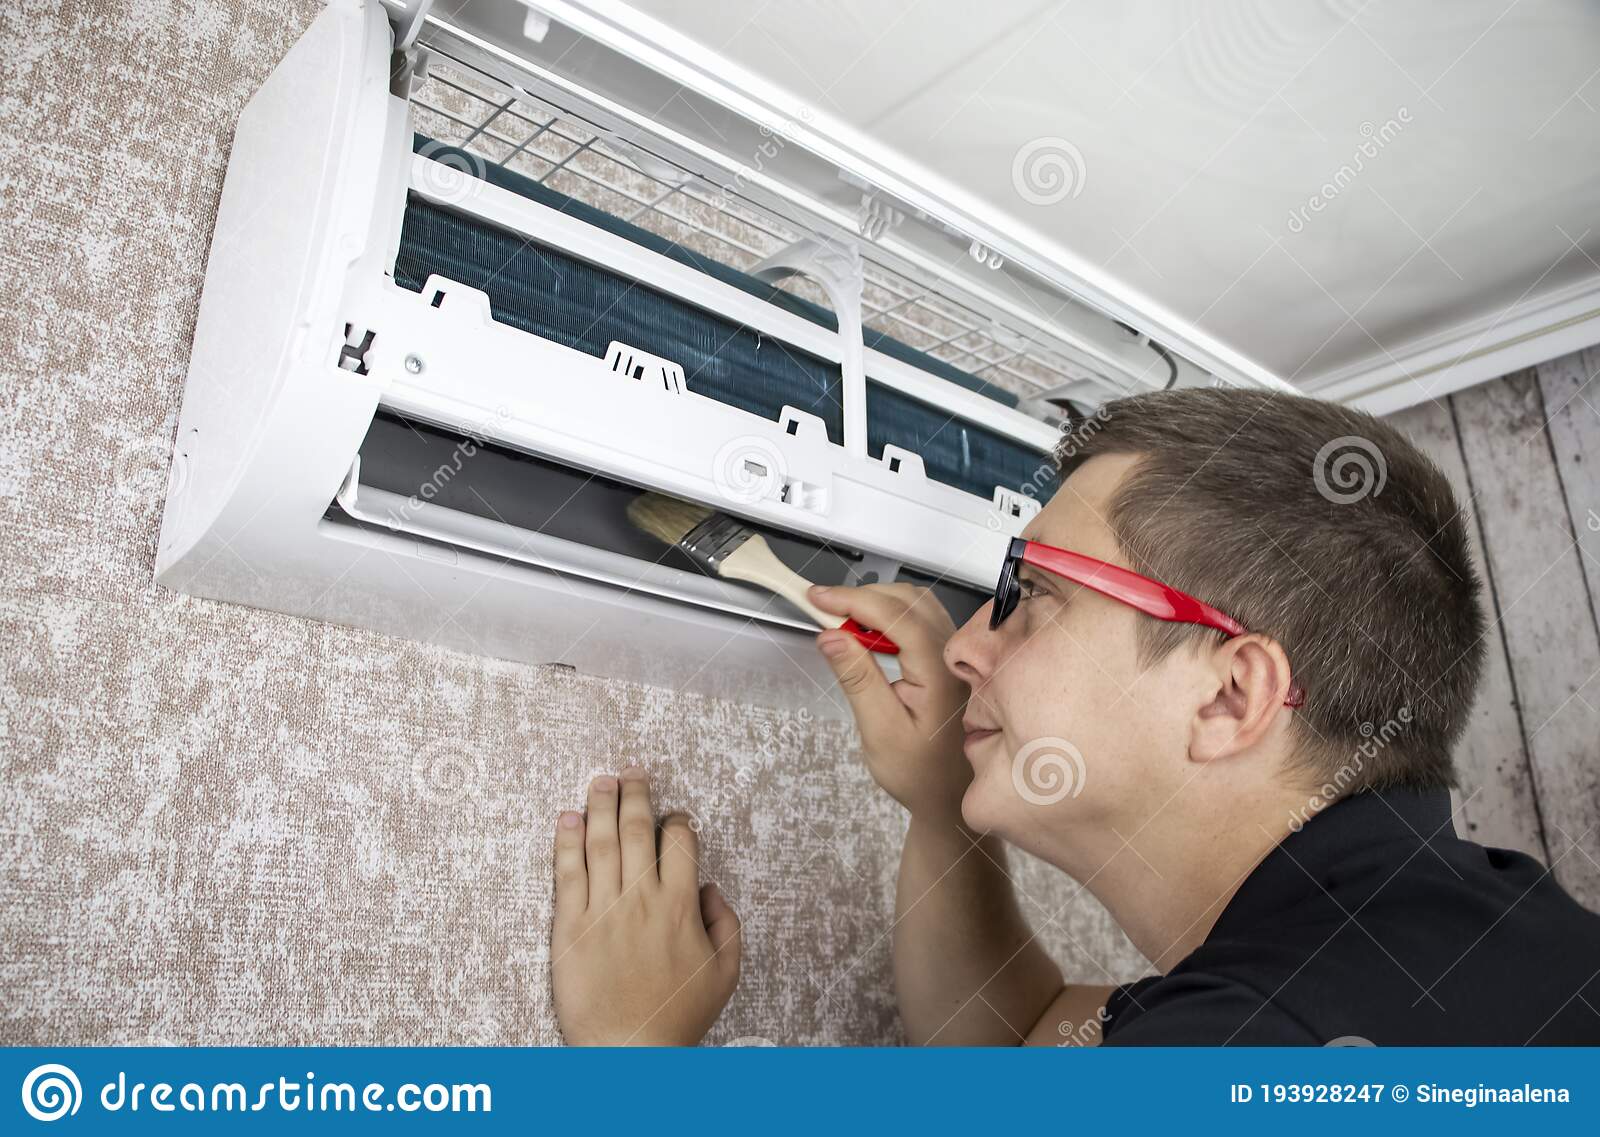 Cleaning The Air Conditioner From Dust, Mold And Dirt. An Air ...